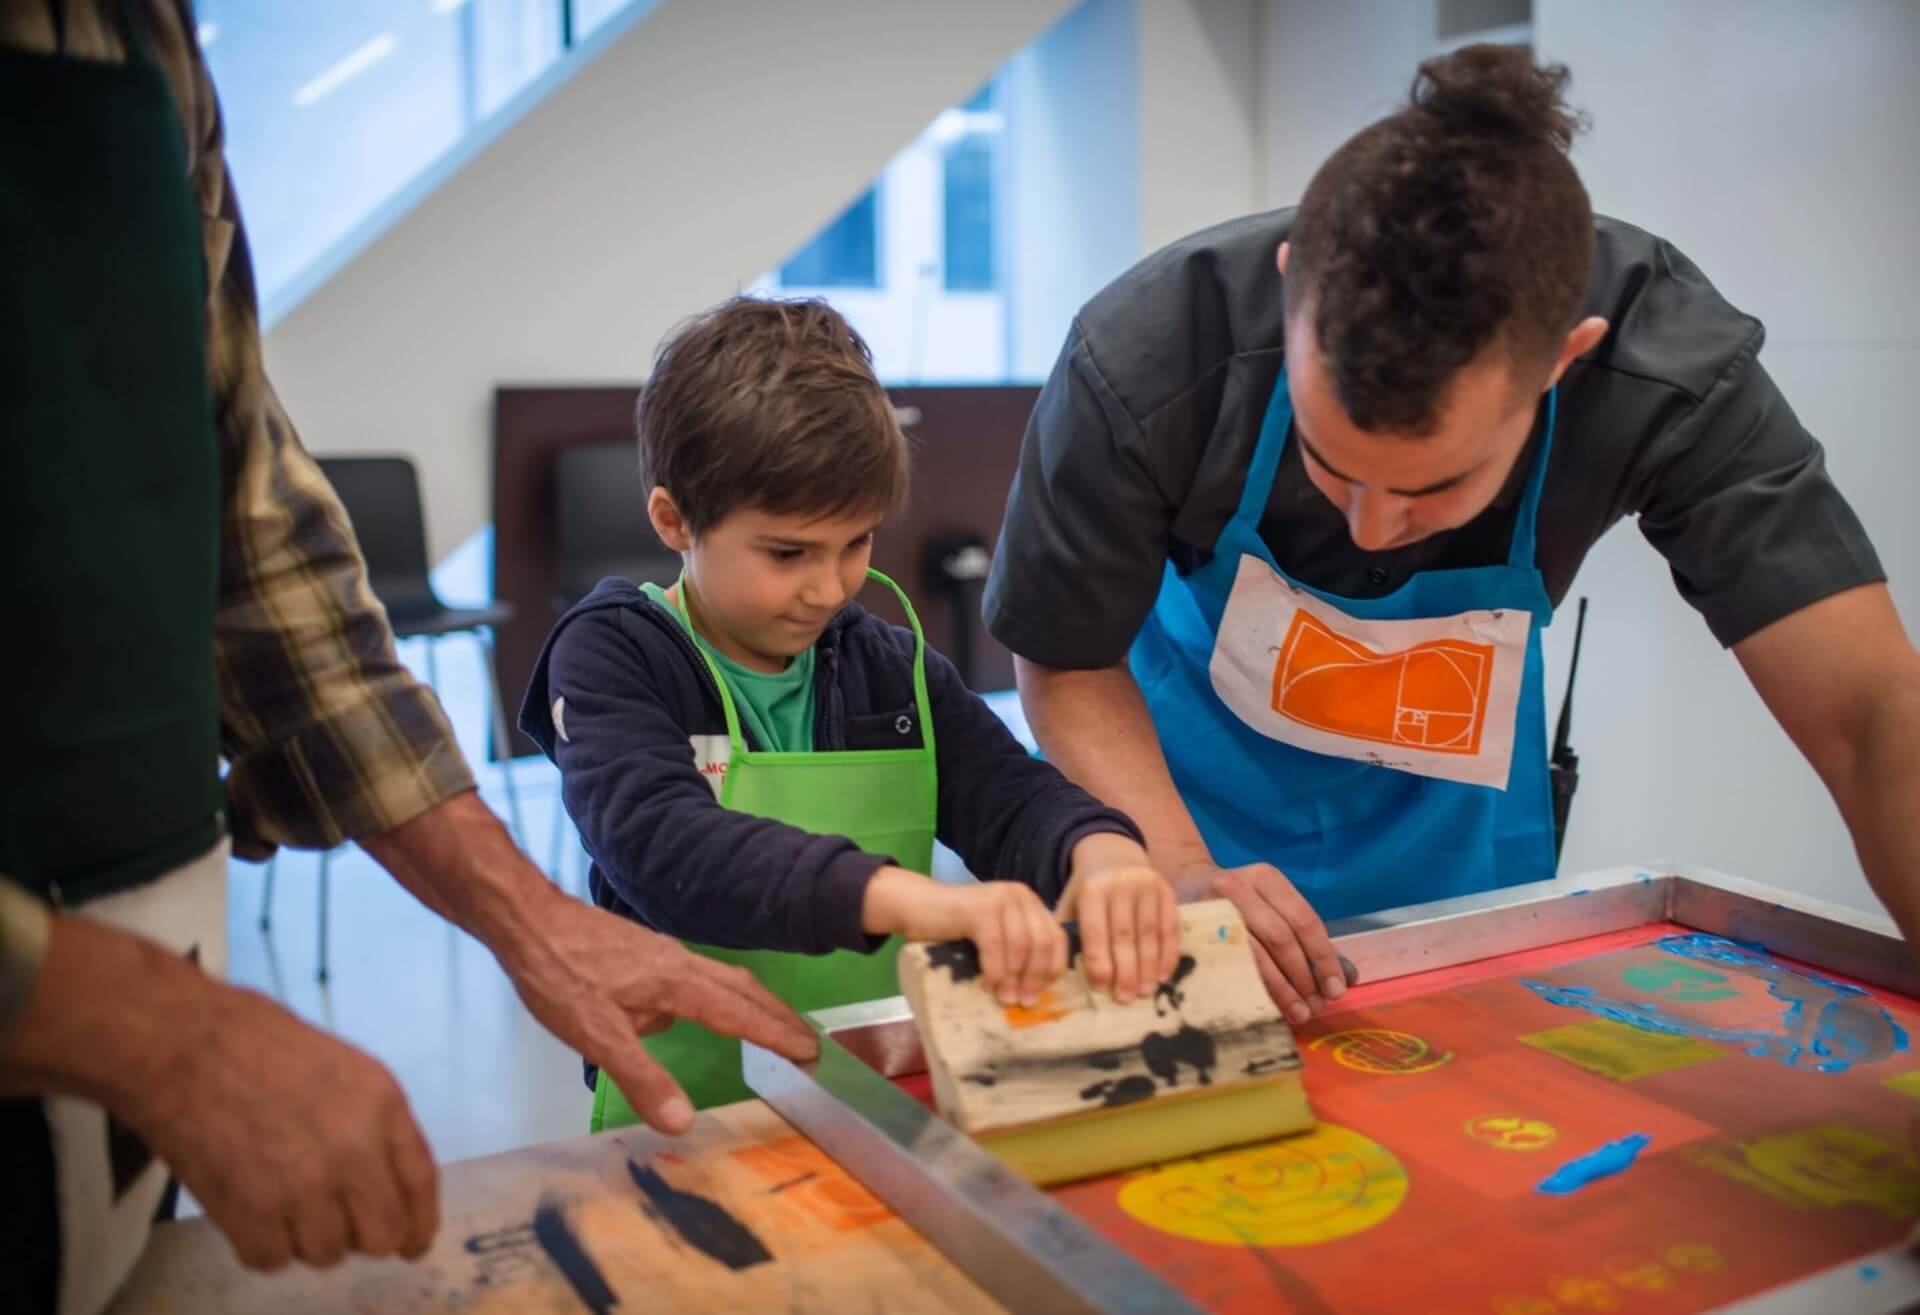 SFMOMA: Expanding state-of-the-arts education for all